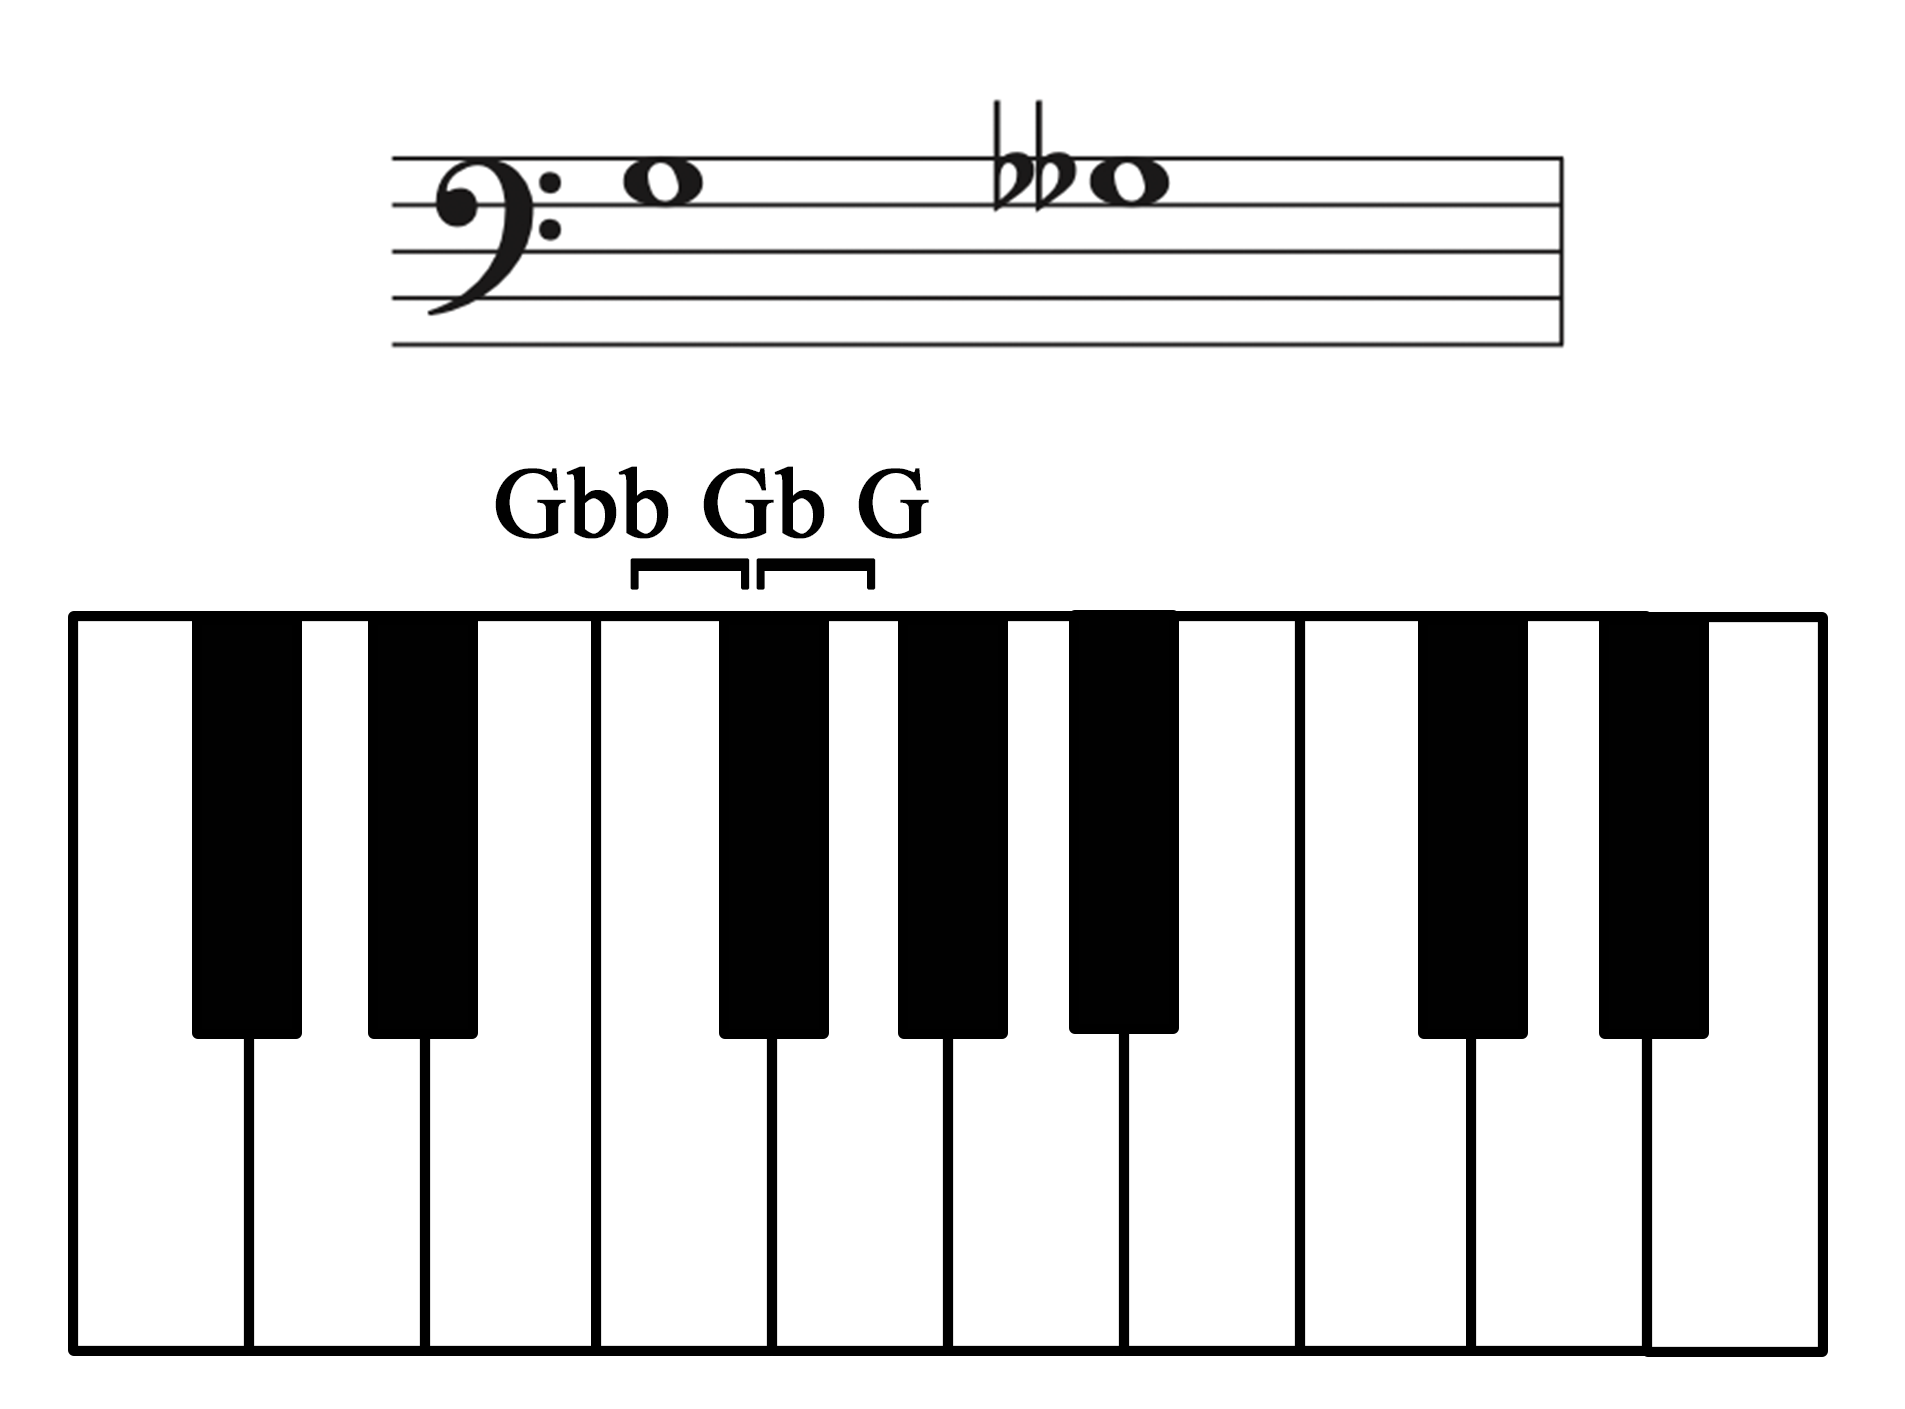 A keyboard with G to G-flat to G-double flat labeled and shown on a staff.